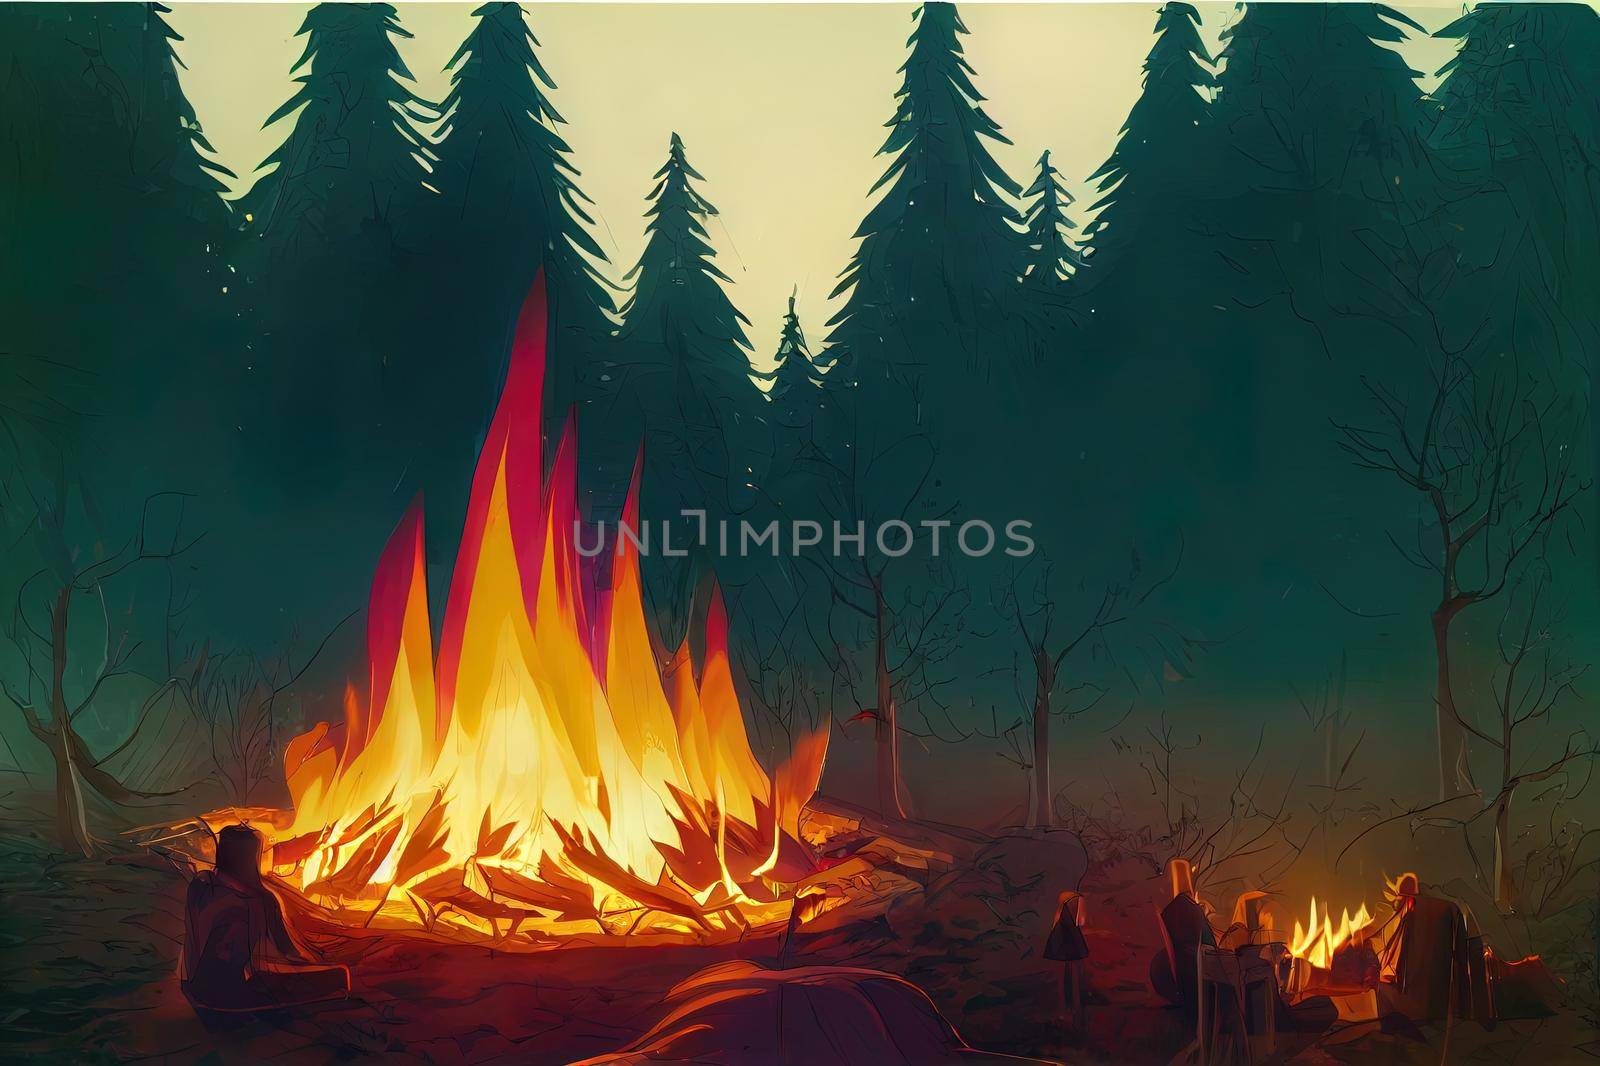 A beautiful campfire in the forest during the day. A high fire burns in a campsite by the river in beautiful nature.